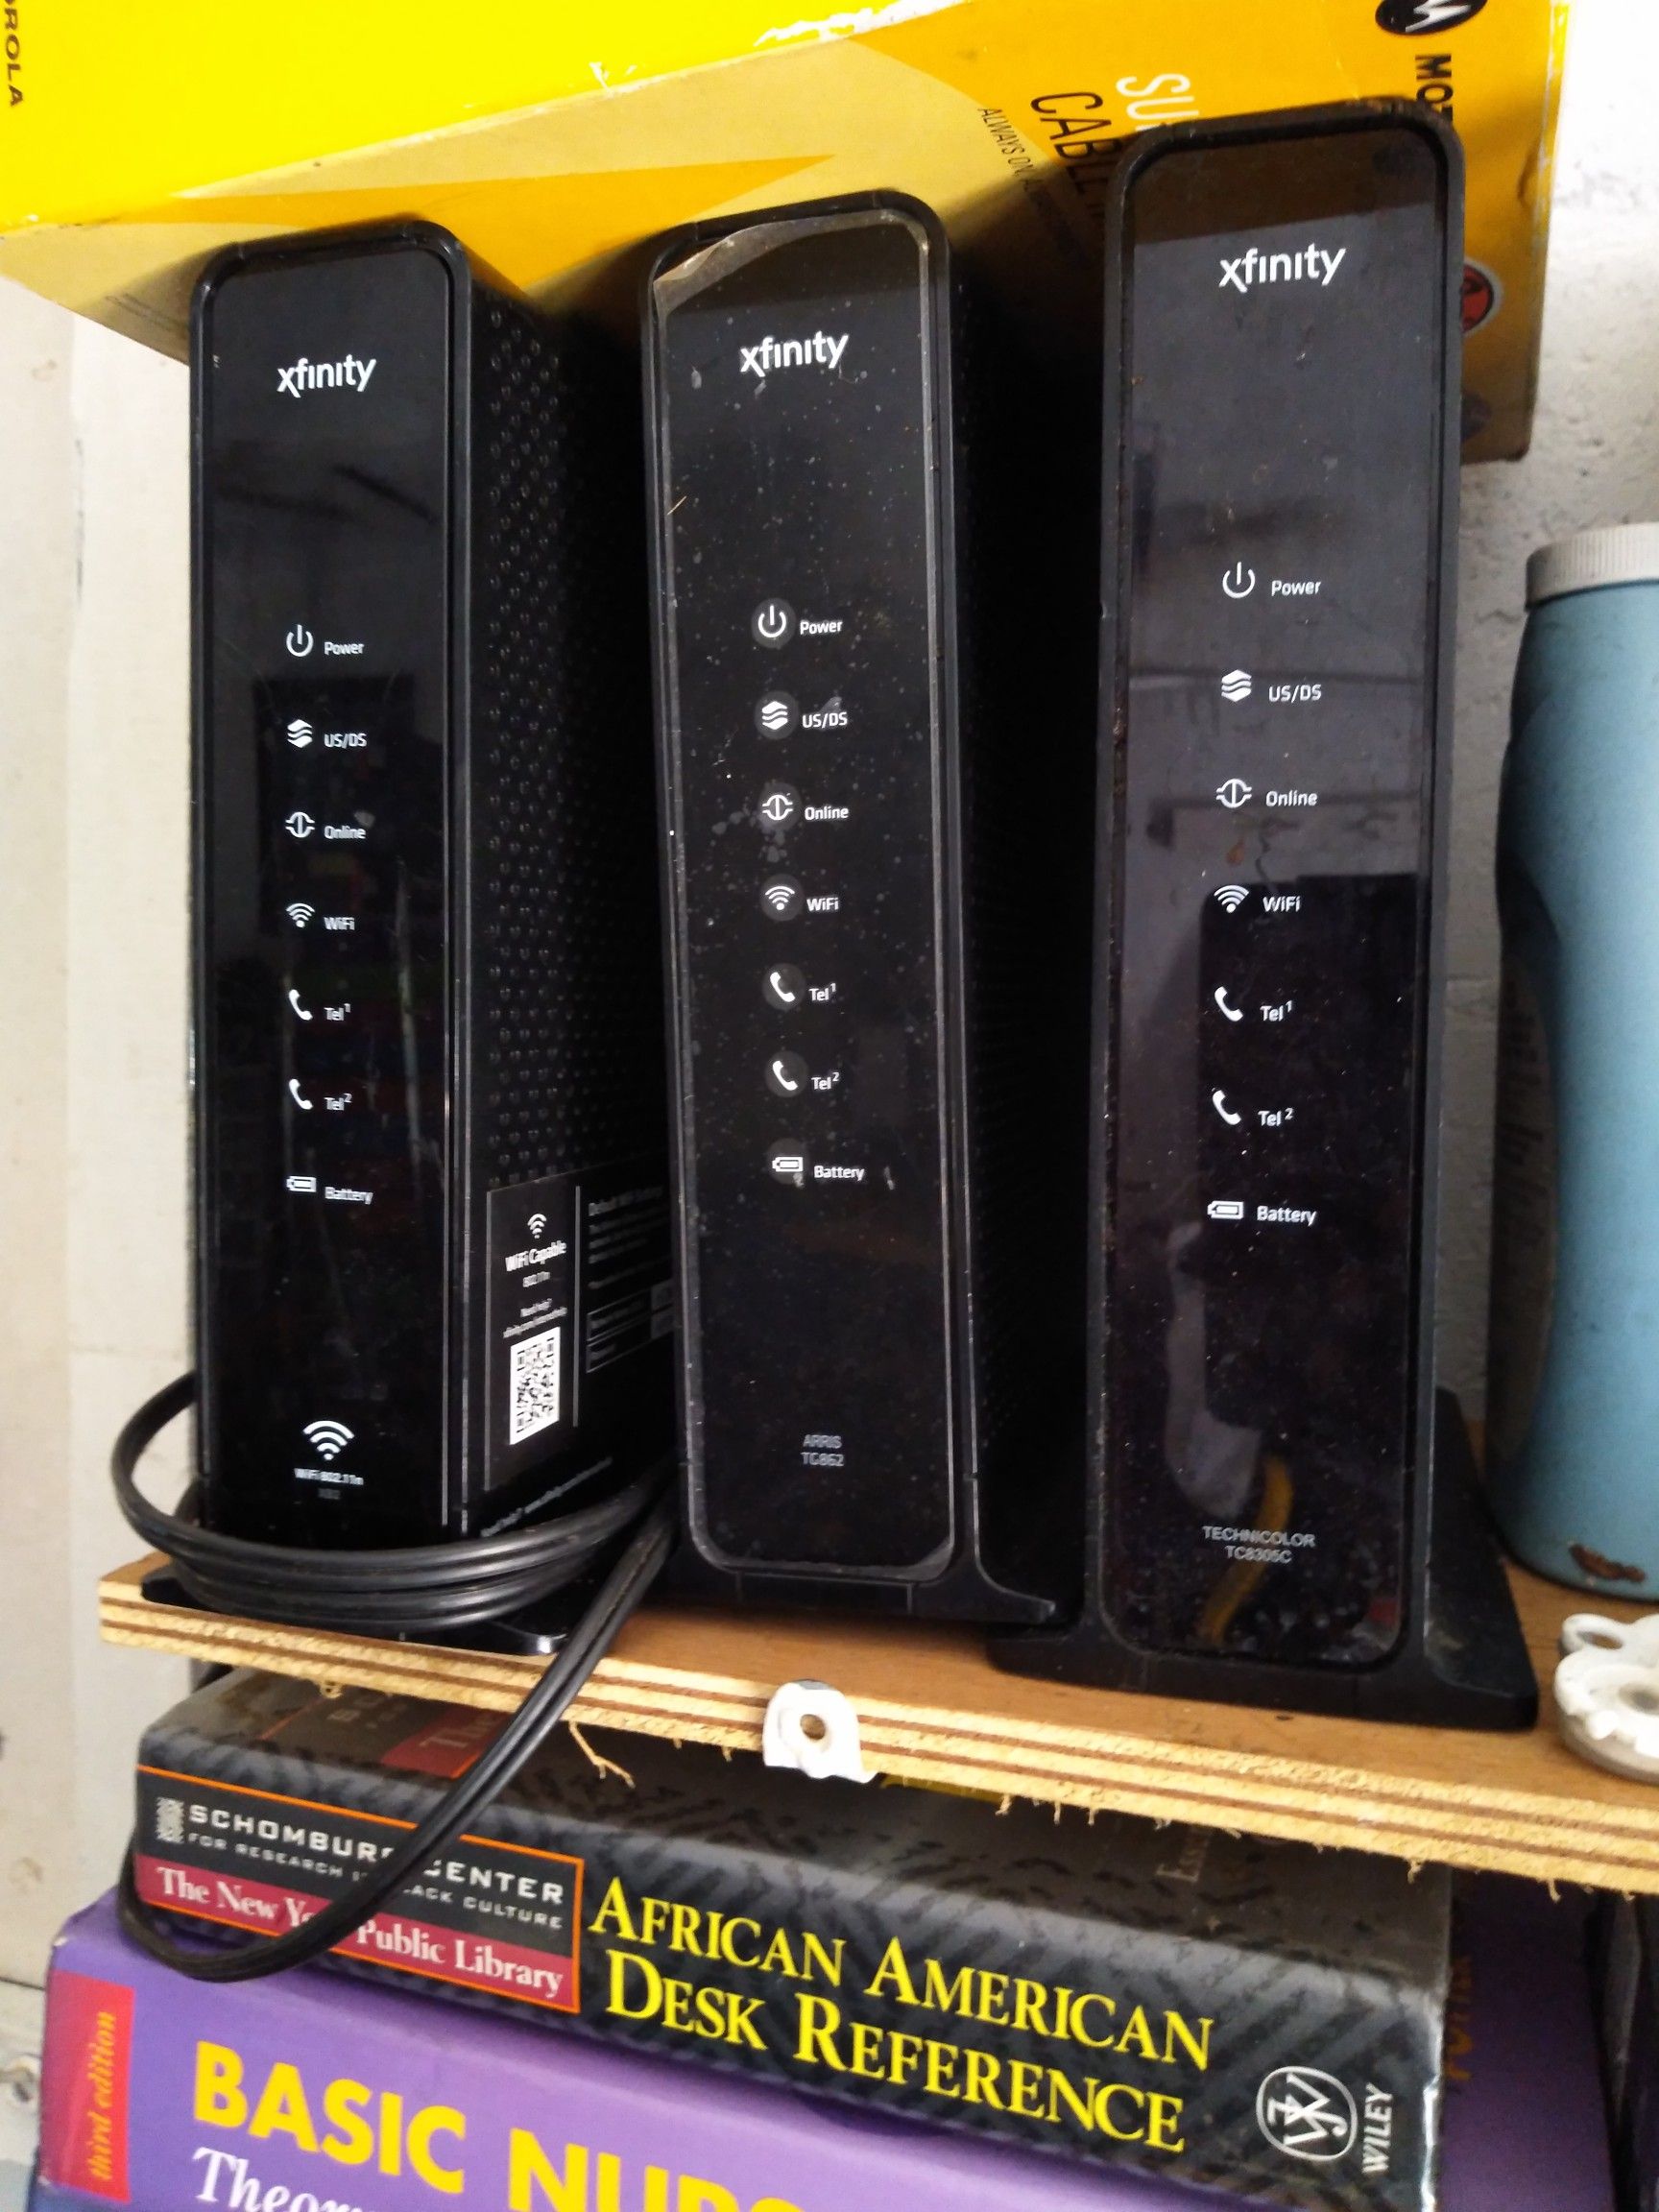 Xfinity internet boxes im selling for cheap